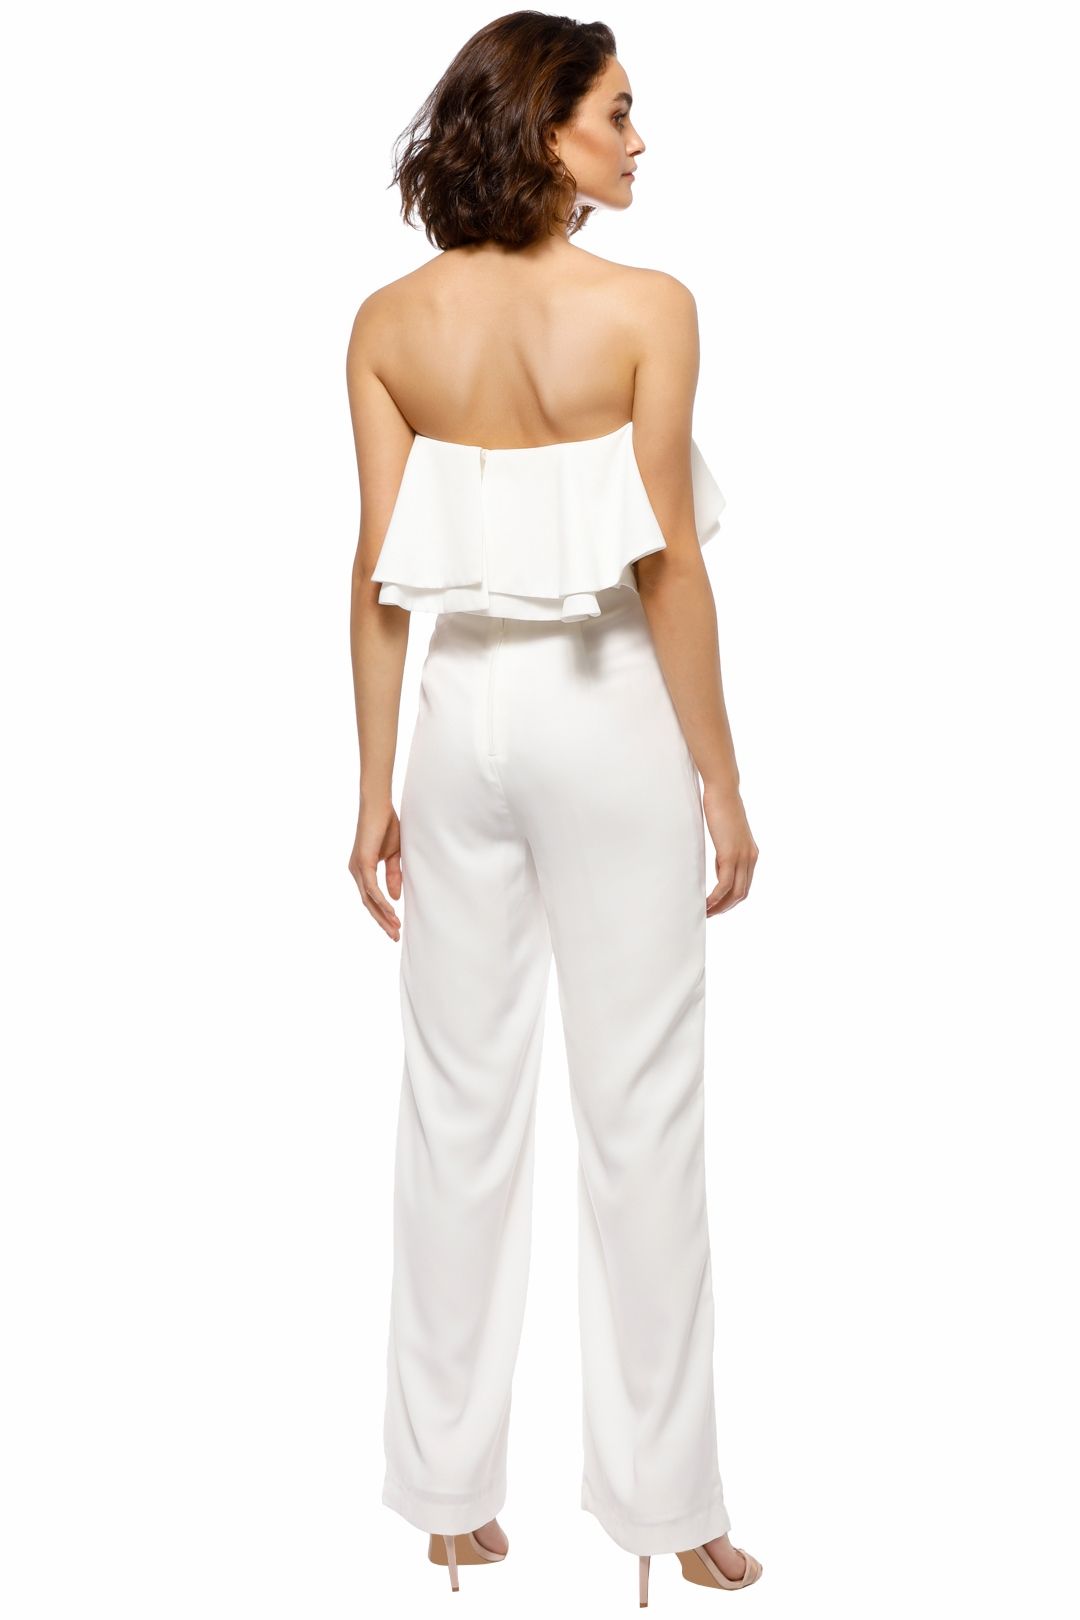 C_MEO - With You Jumpsuit - White - Back